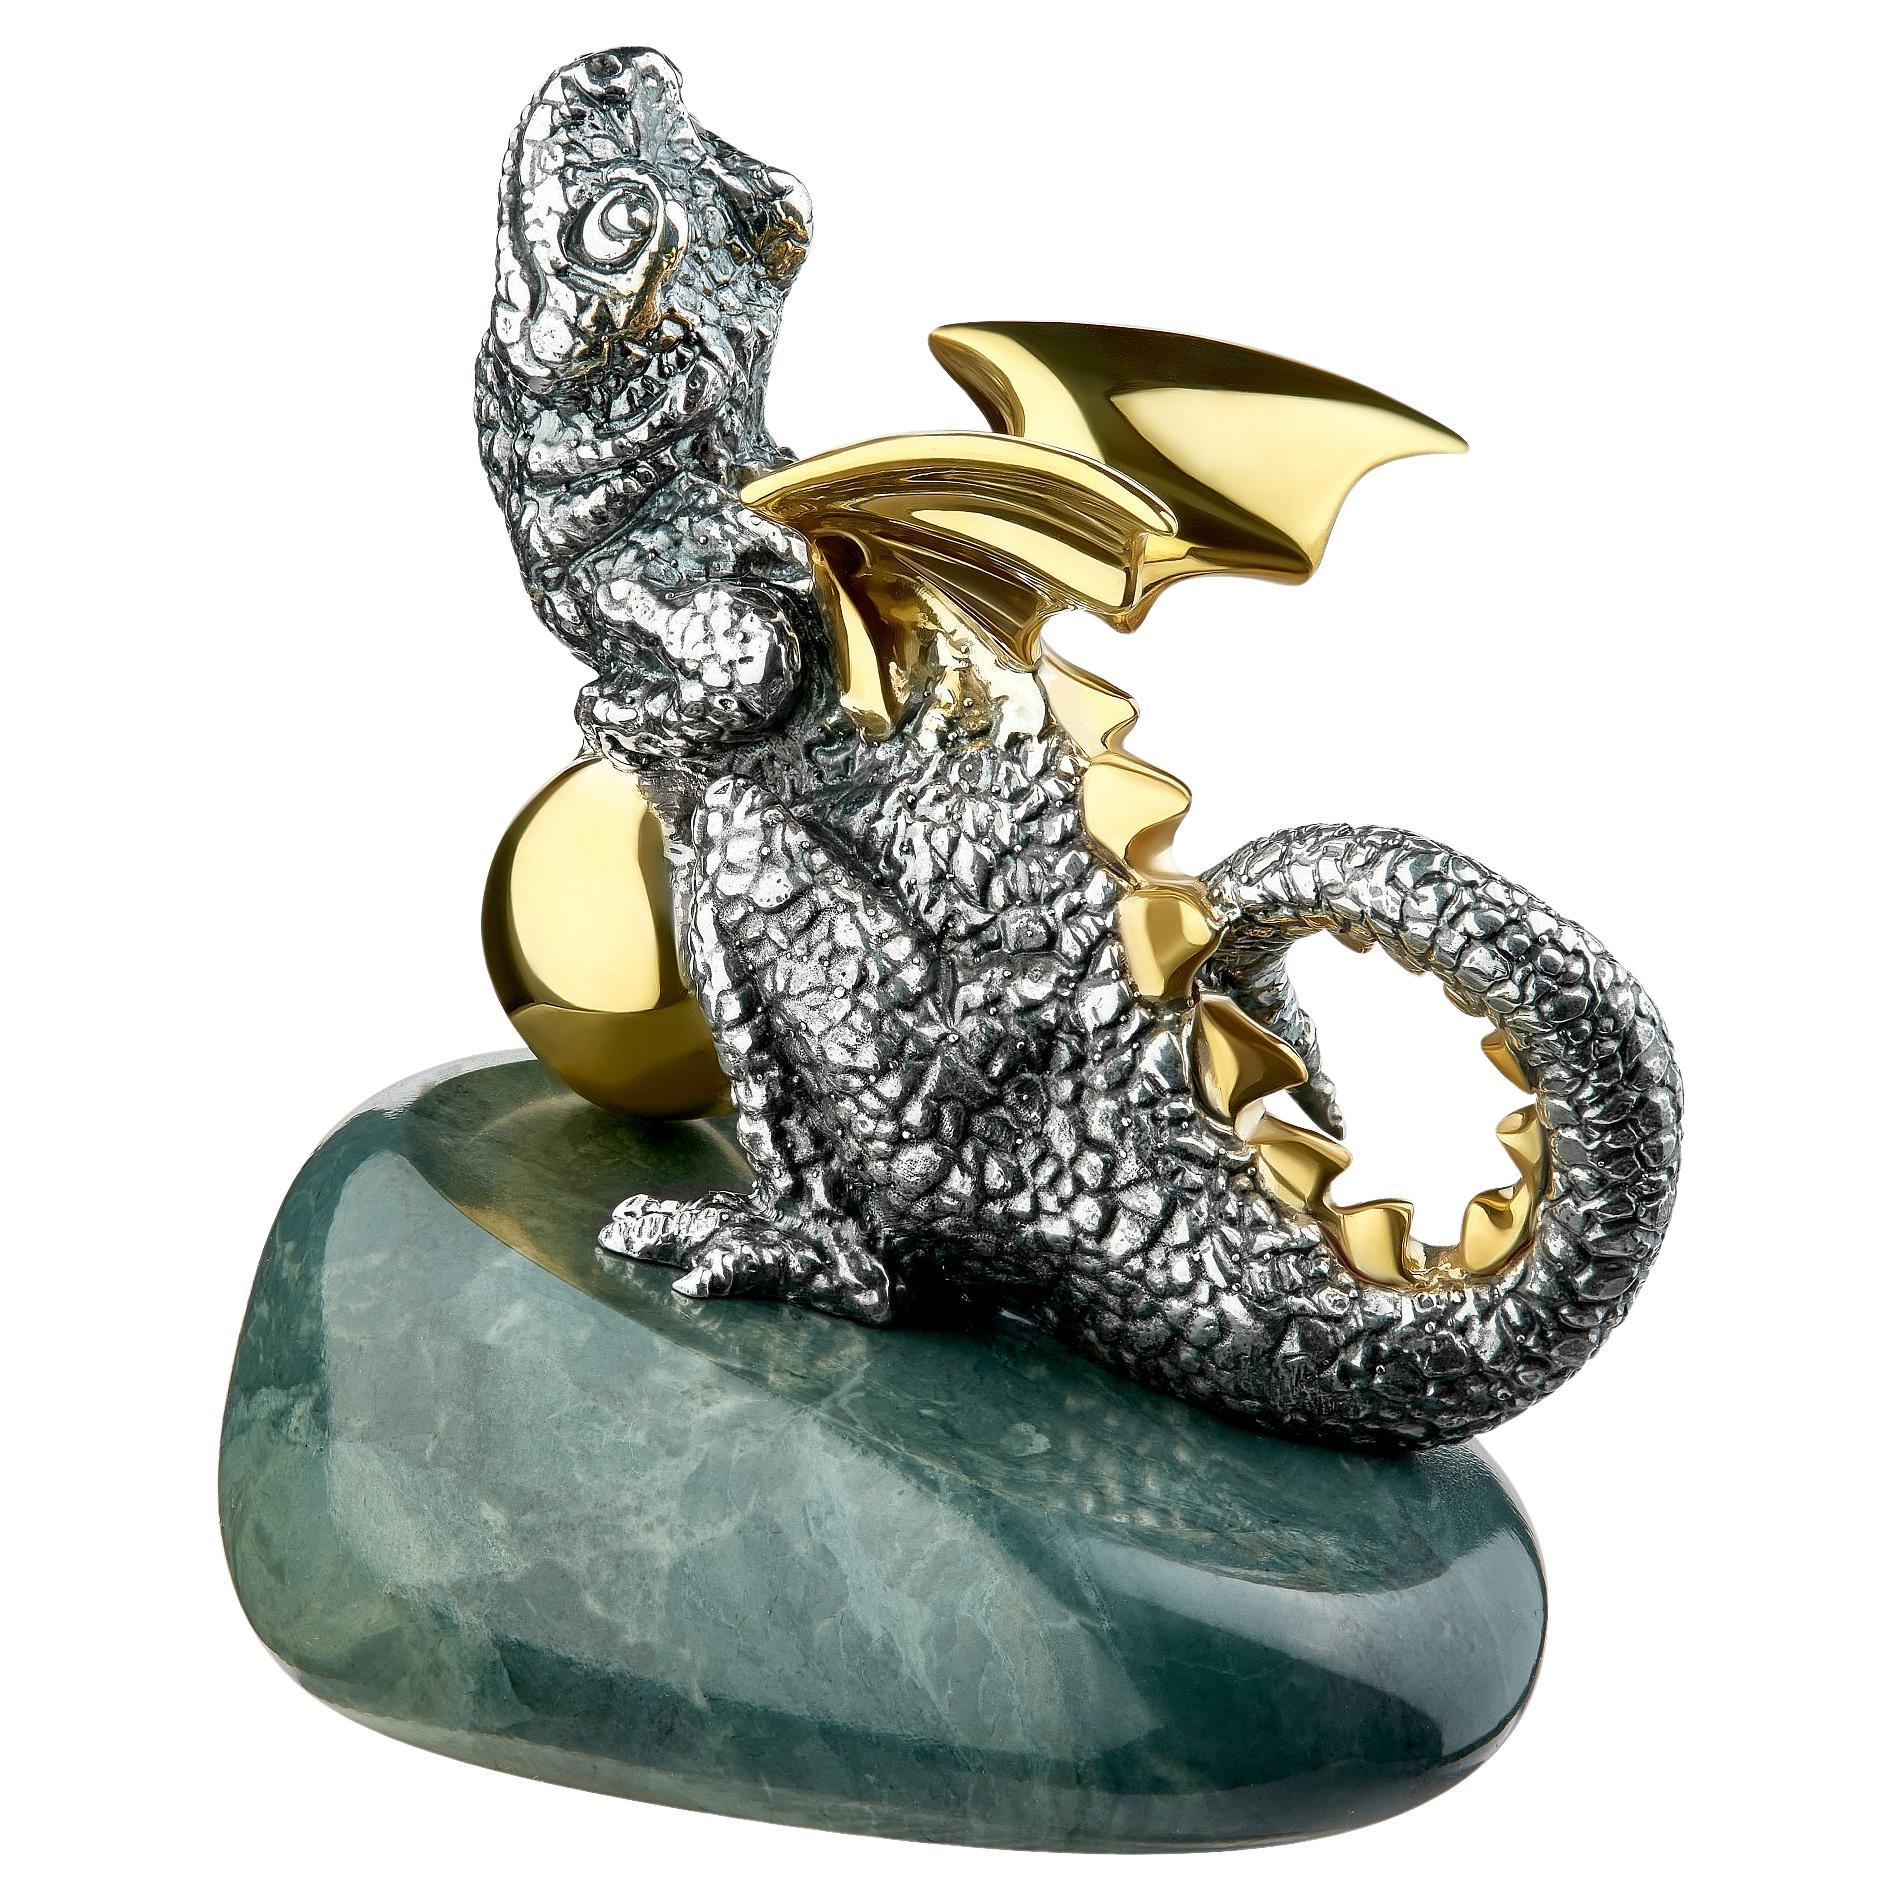 SV Gold Plated Dragon Miniature for Gift and Talisman For Sale